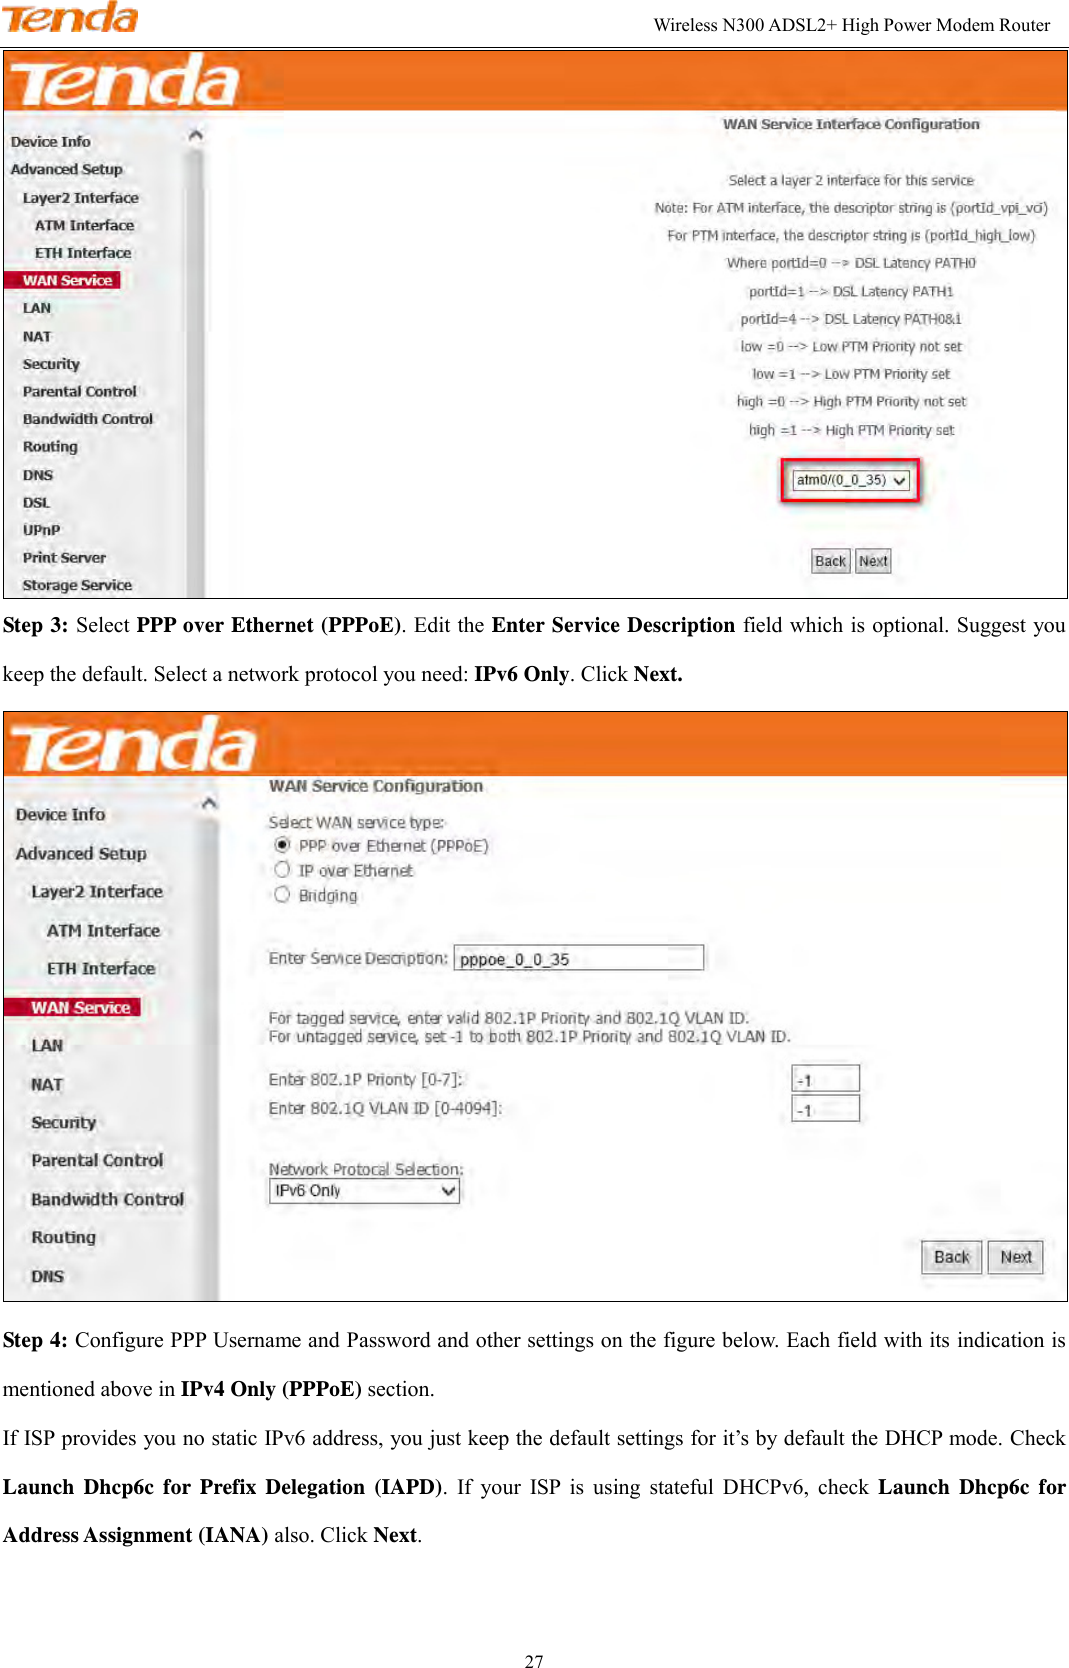                                                                                                               Wireless N300 ADSL2+ High Power Modem Router 27  Step 3: Select PPP over Ethernet (PPPoE). Edit the Enter Service Description field which is optional. Suggest you keep the default. Select a network protocol you need: IPv6 Only. Click Next.  Step 4: Configure PPP Username and Password and other settings on the figure below. Each field with its indication is mentioned above in IPv4 Only (PPPoE) section.   If ISP provides you no static IPv6 address, you just keep the default settings for it’s by default the DHCP mode. Check Launch  Dhcp6c  for  Prefix  Delegation  (IAPD).  If  your  ISP  is  using  stateful  DHCPv6,  check  Launch  Dhcp6c  for Address Assignment (IANA) also. Click Next. 